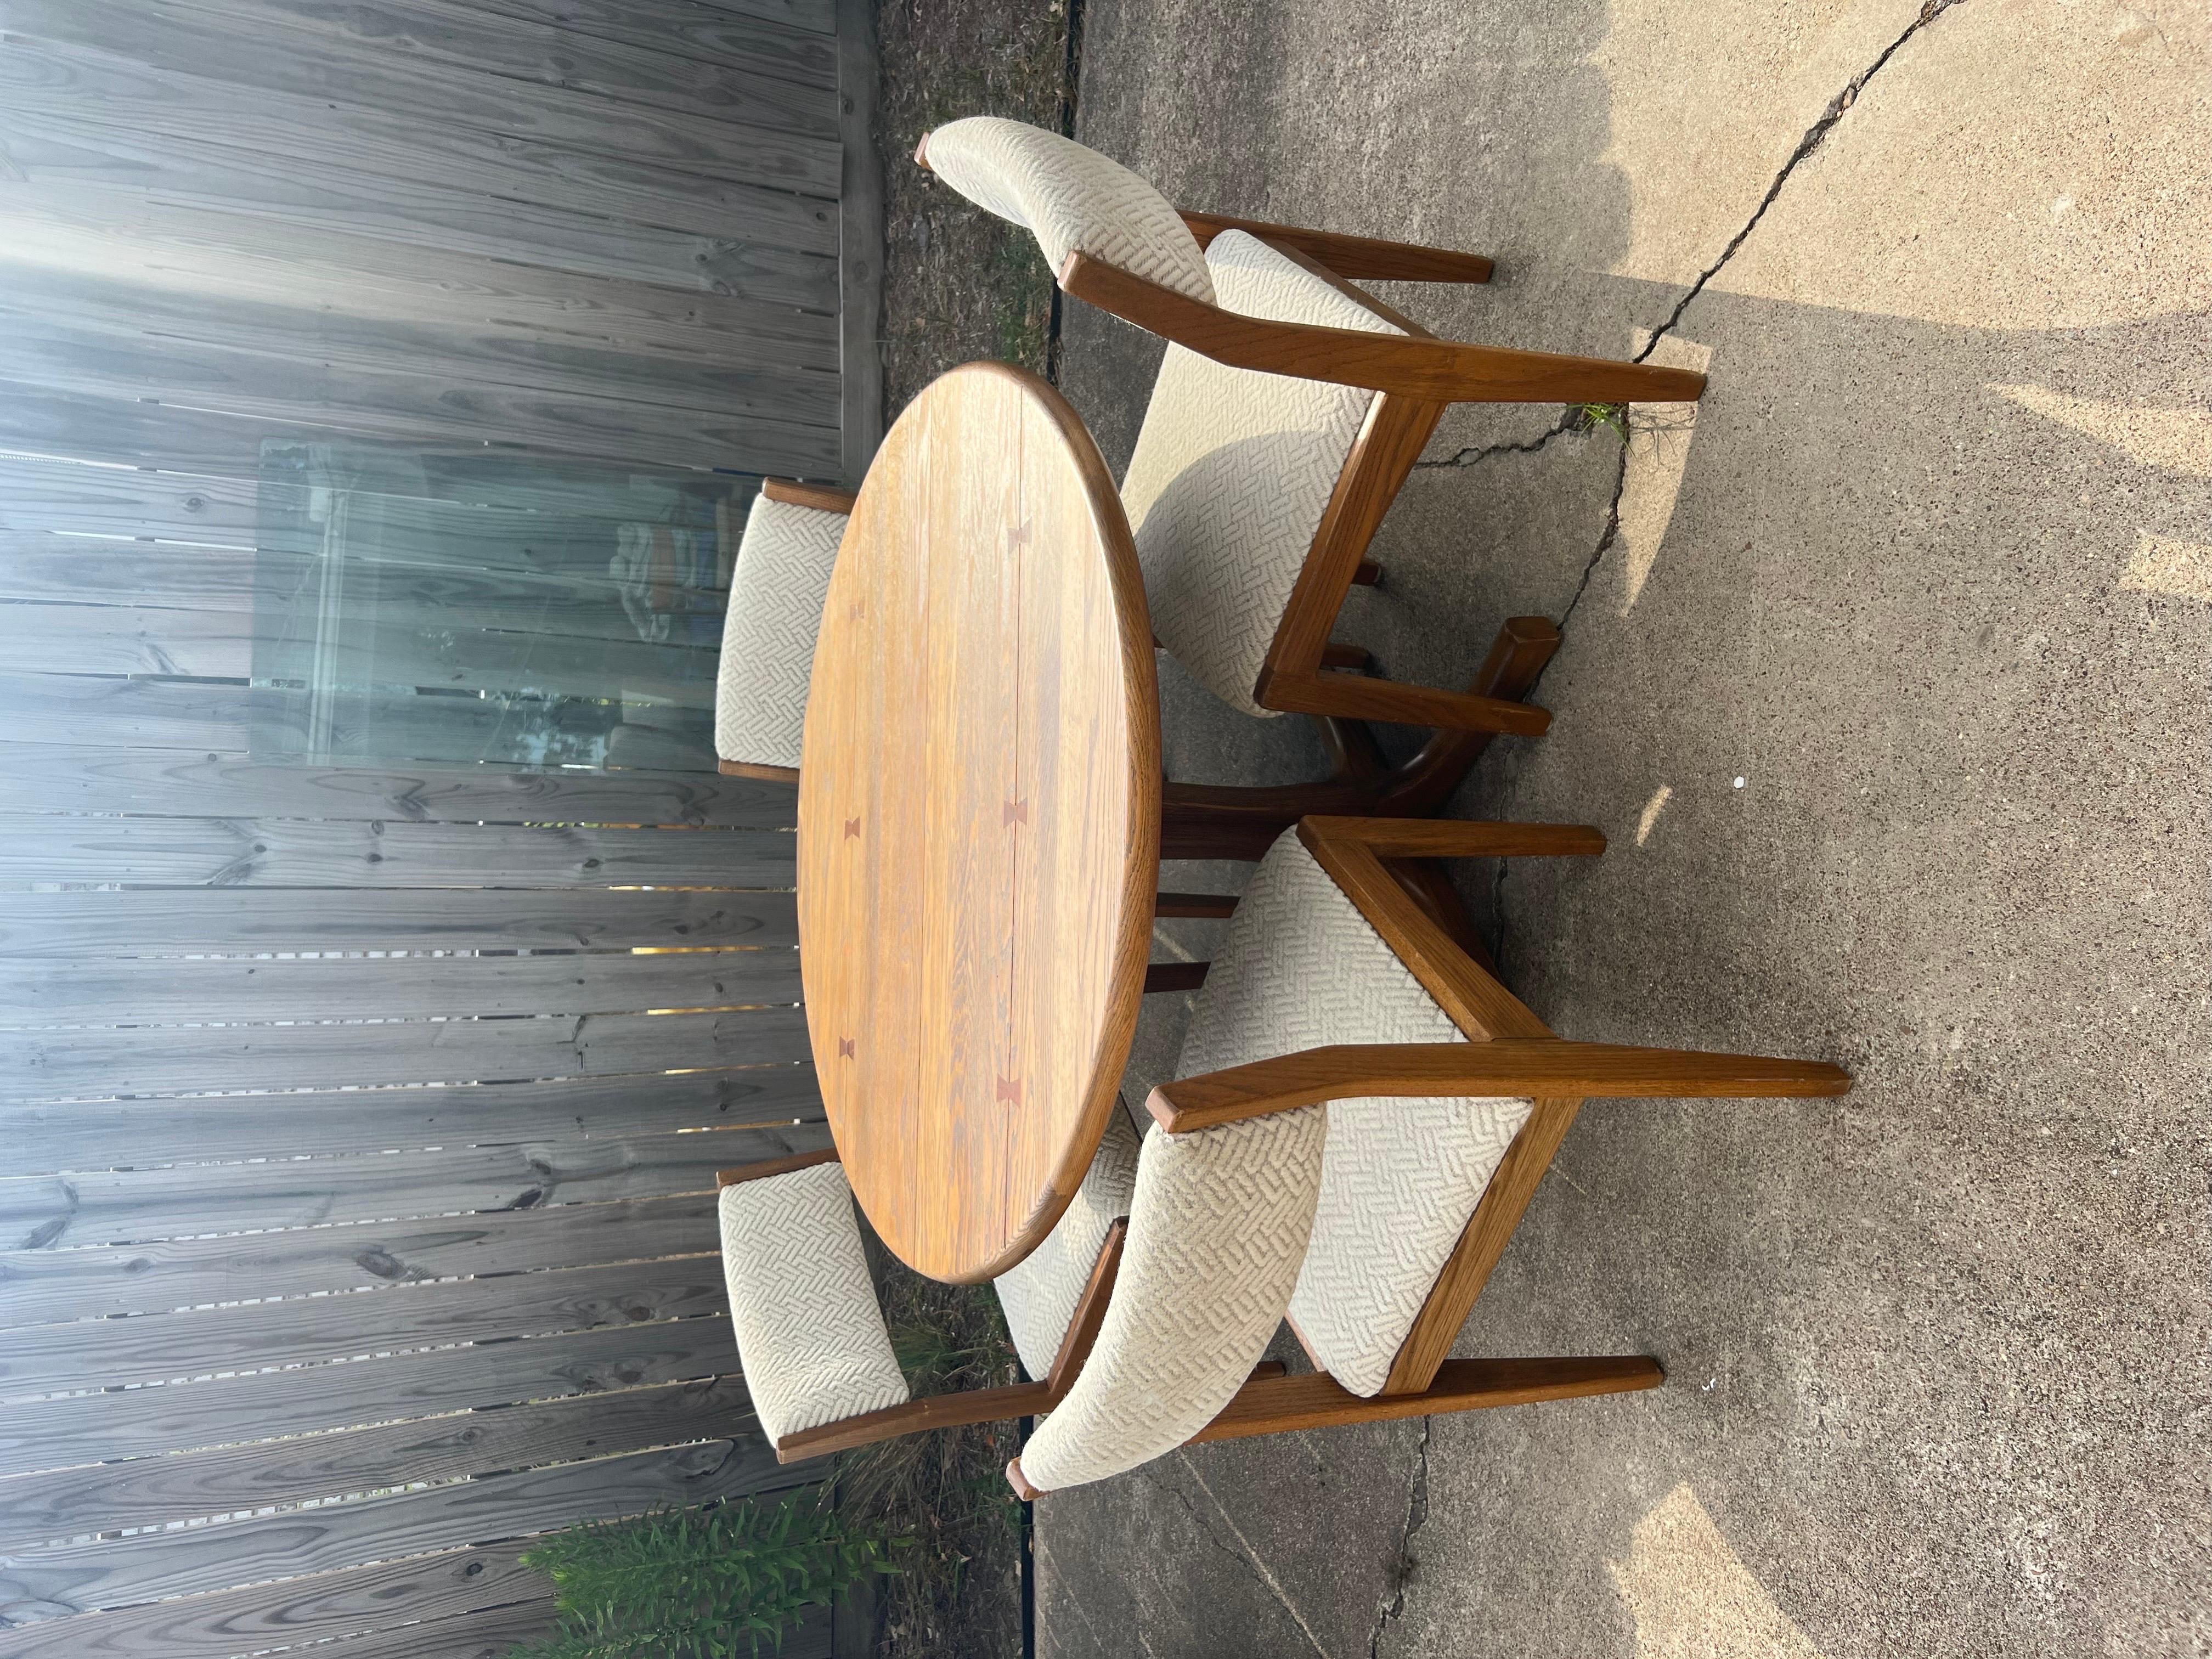 Vintage solid oak round pedestal dining table and 4 chairs by Conant Ball. Does not come with leaves. Fabric has some minor discoloration, and there is normal wear on the table from age. Everything is in its original condition.